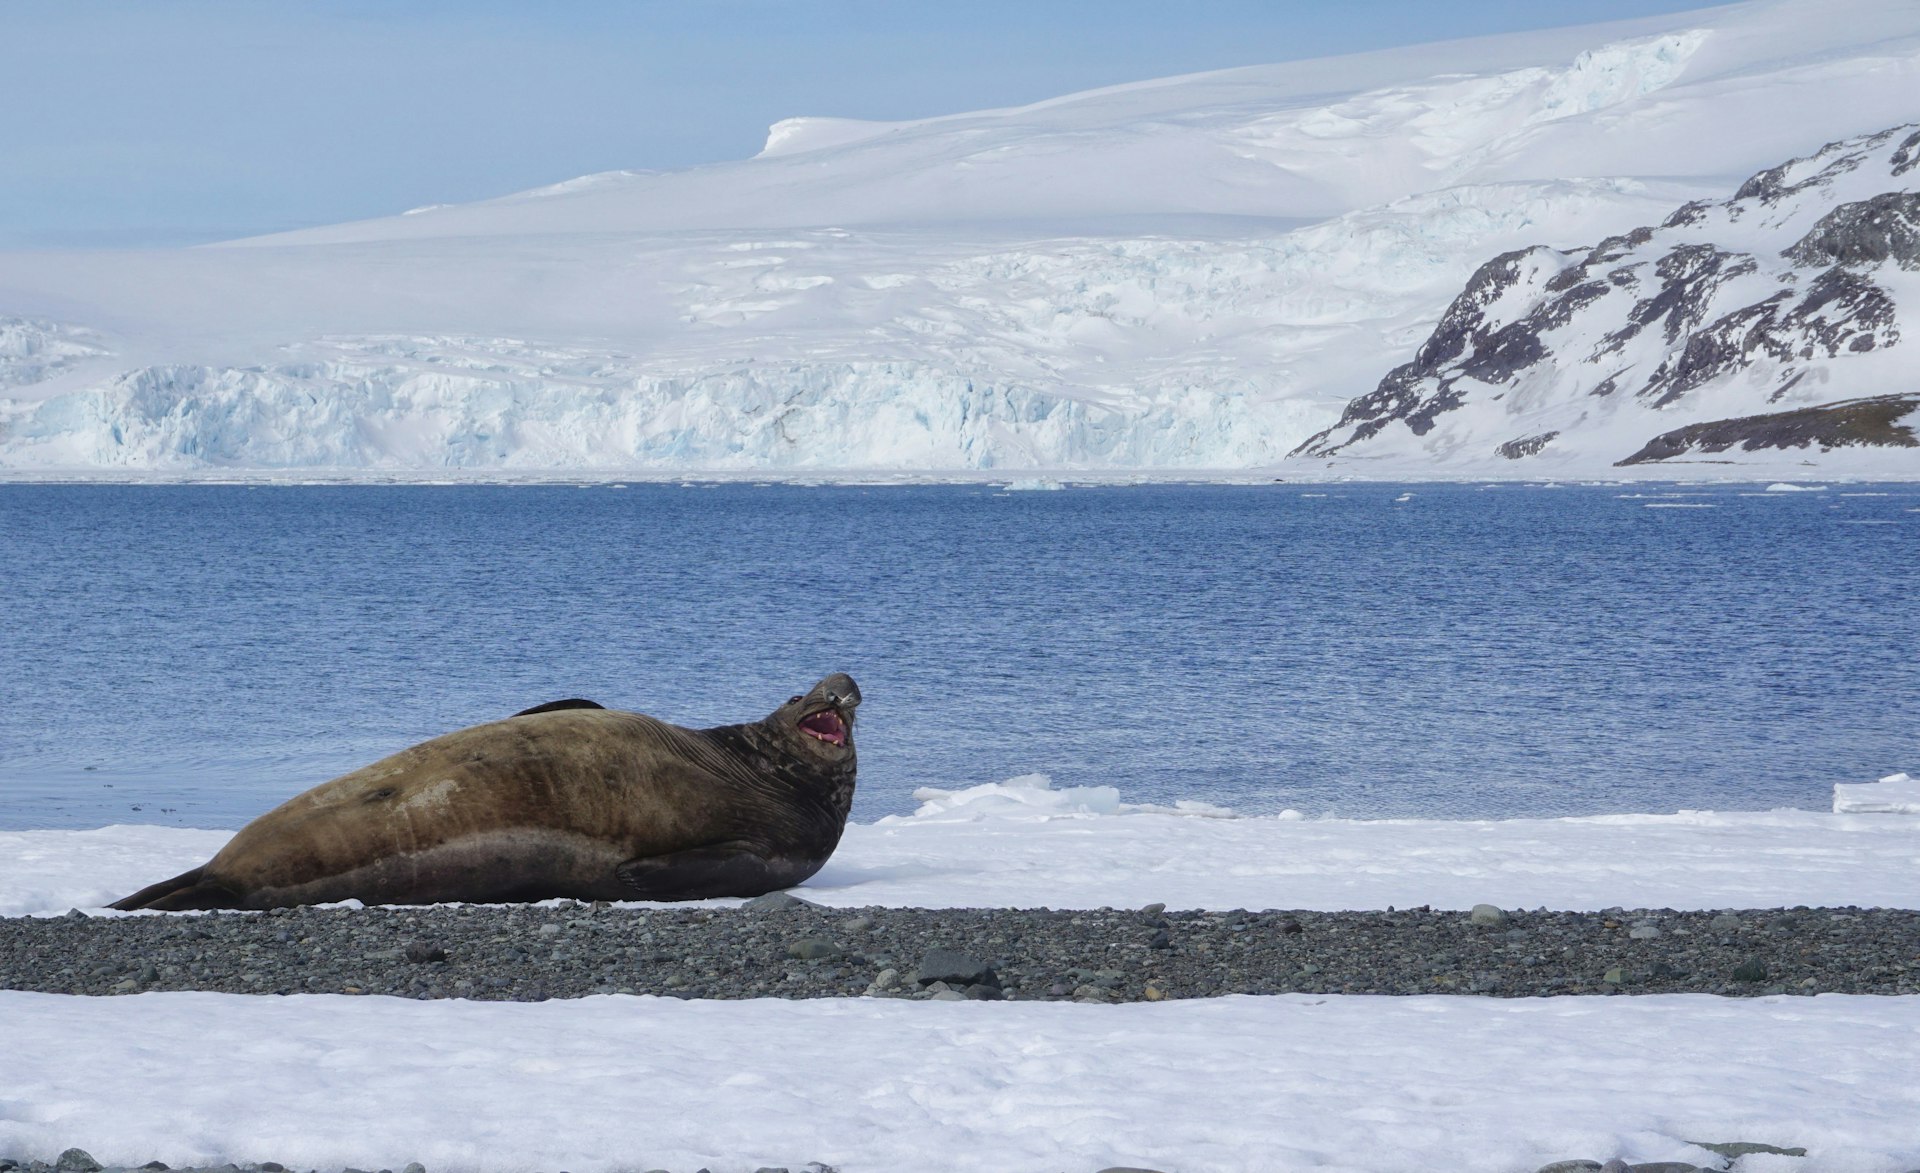 An elephant seal models for tourists on the first ever hybrid powered cruise to Antarctica